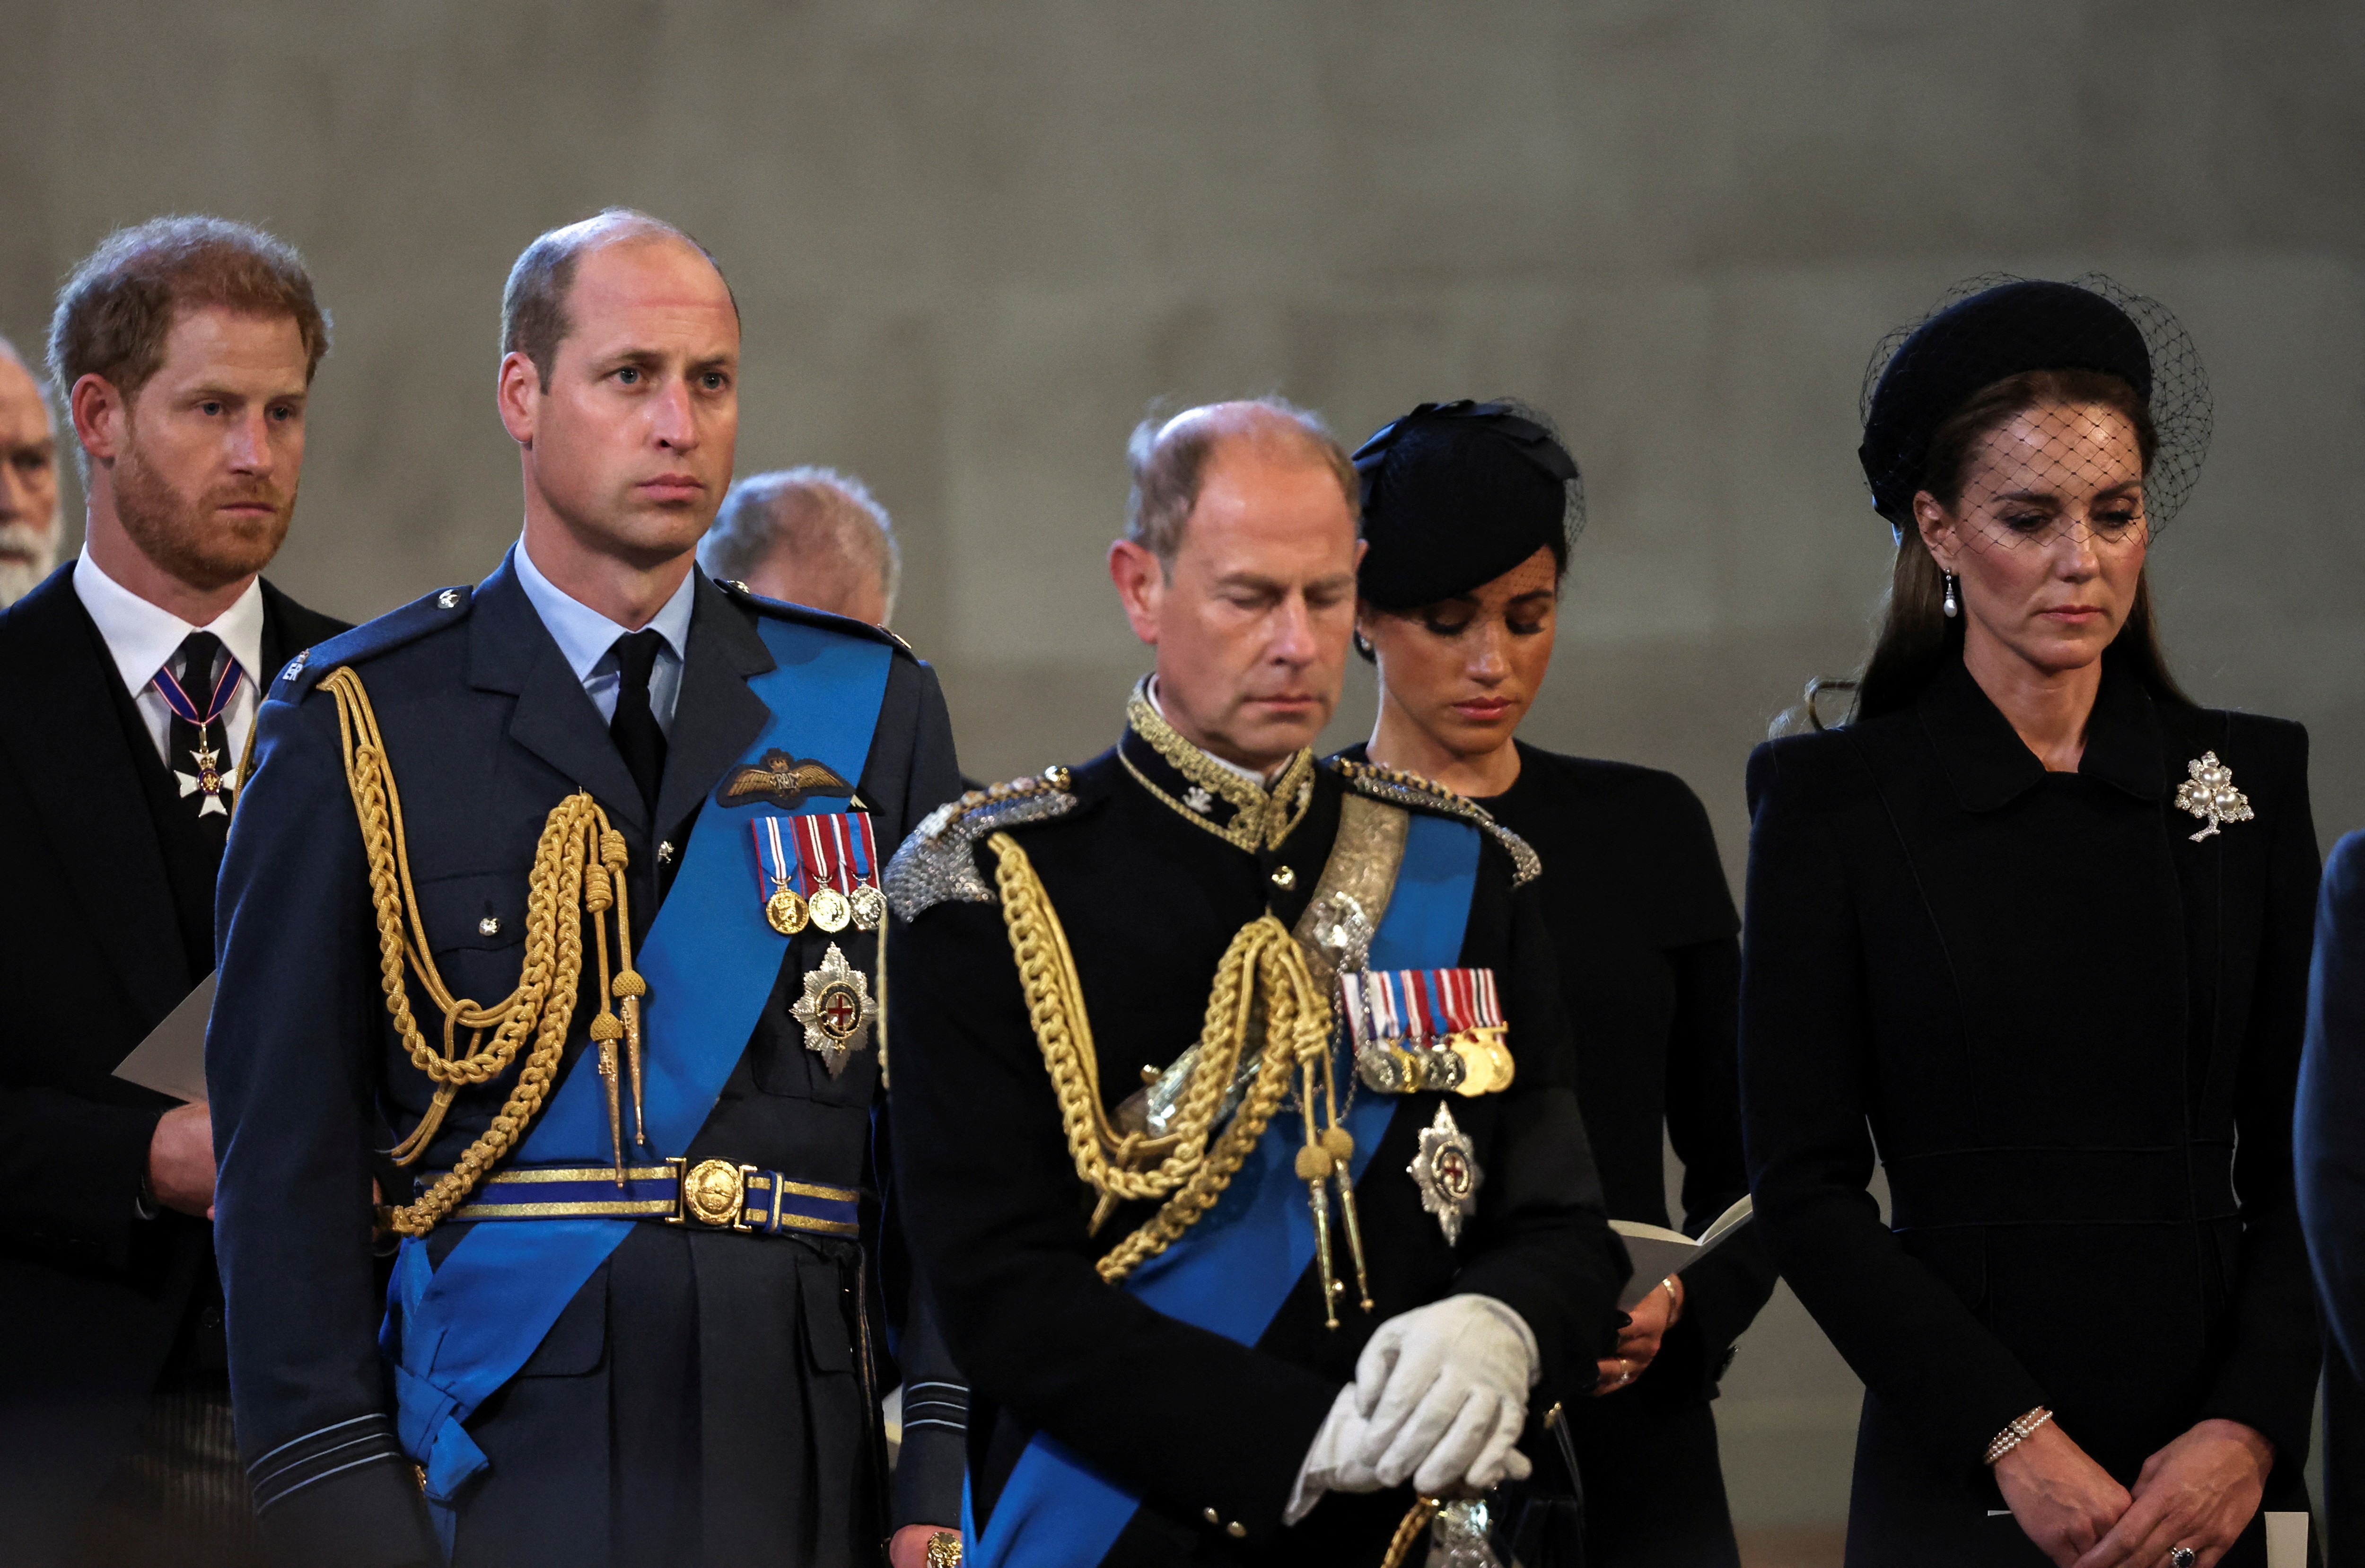 LONDON, ENGLAND - SEPTEMBER 14: Prince Edward, Earl of Wessex, (C) Prince William, Prince of Wales, Catherine, Princess of Wales, Prince Harry, Duke of Sussex, (L) ay their respects during the ceremonial procession of the coffin of Queen Elizabeth II from (Foto: Getty Images)